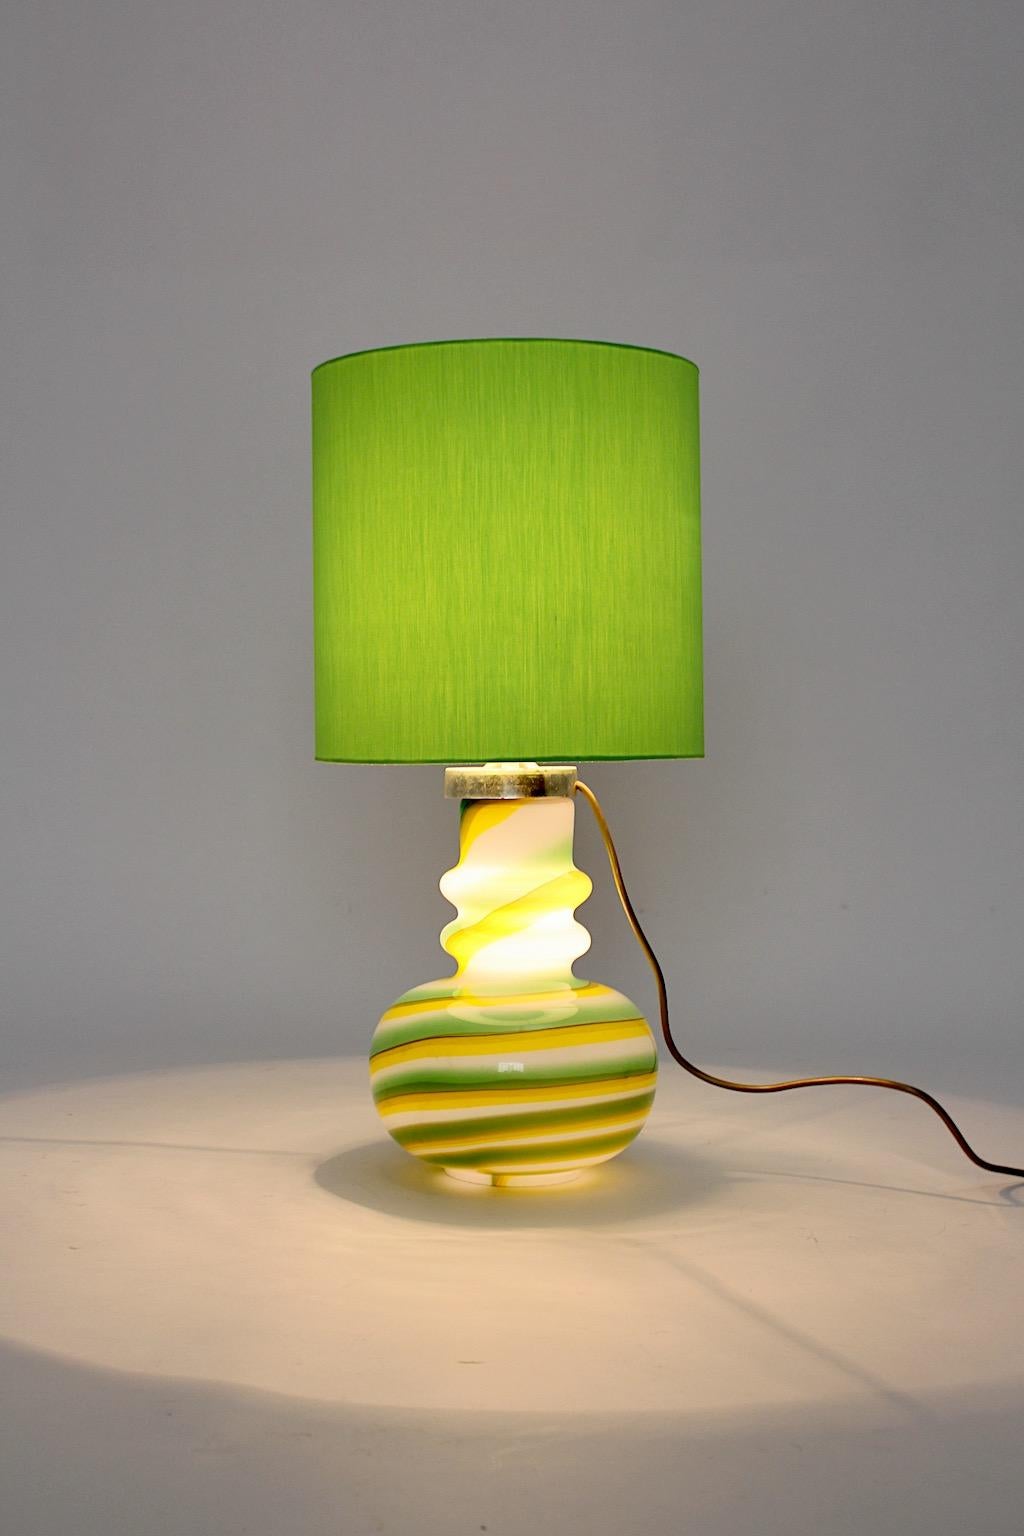 Space Age vintage table lamp from glass in happy colors green, yellow and white designed and executed, Italy, 1960s.
While the striped glass body shows a beautiful shape, the grass green lamp shade is renewed.
Two E 27 sockets and on/off switch at